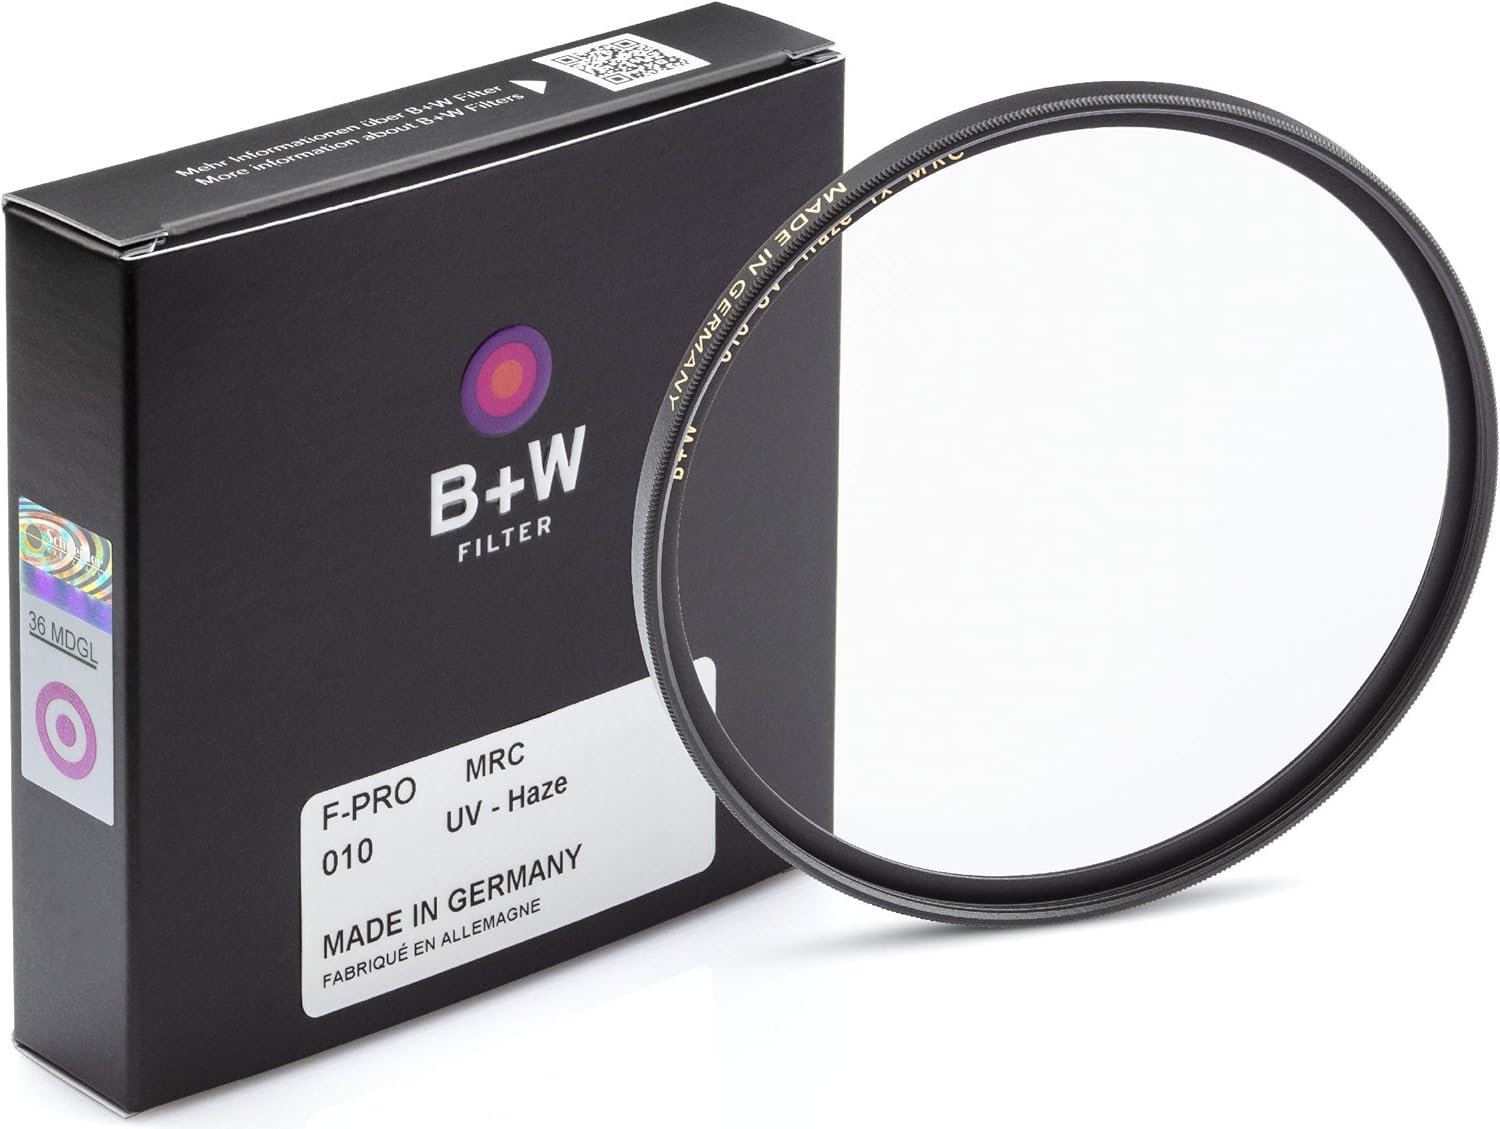 B + W 95mm UV Protection Filter (010) for Camera Lens – Standard Mount (F-PRO), MRC, 16 Layers Multi-Resistant Coating, Photography Filter, 95 mm, Clear Protector